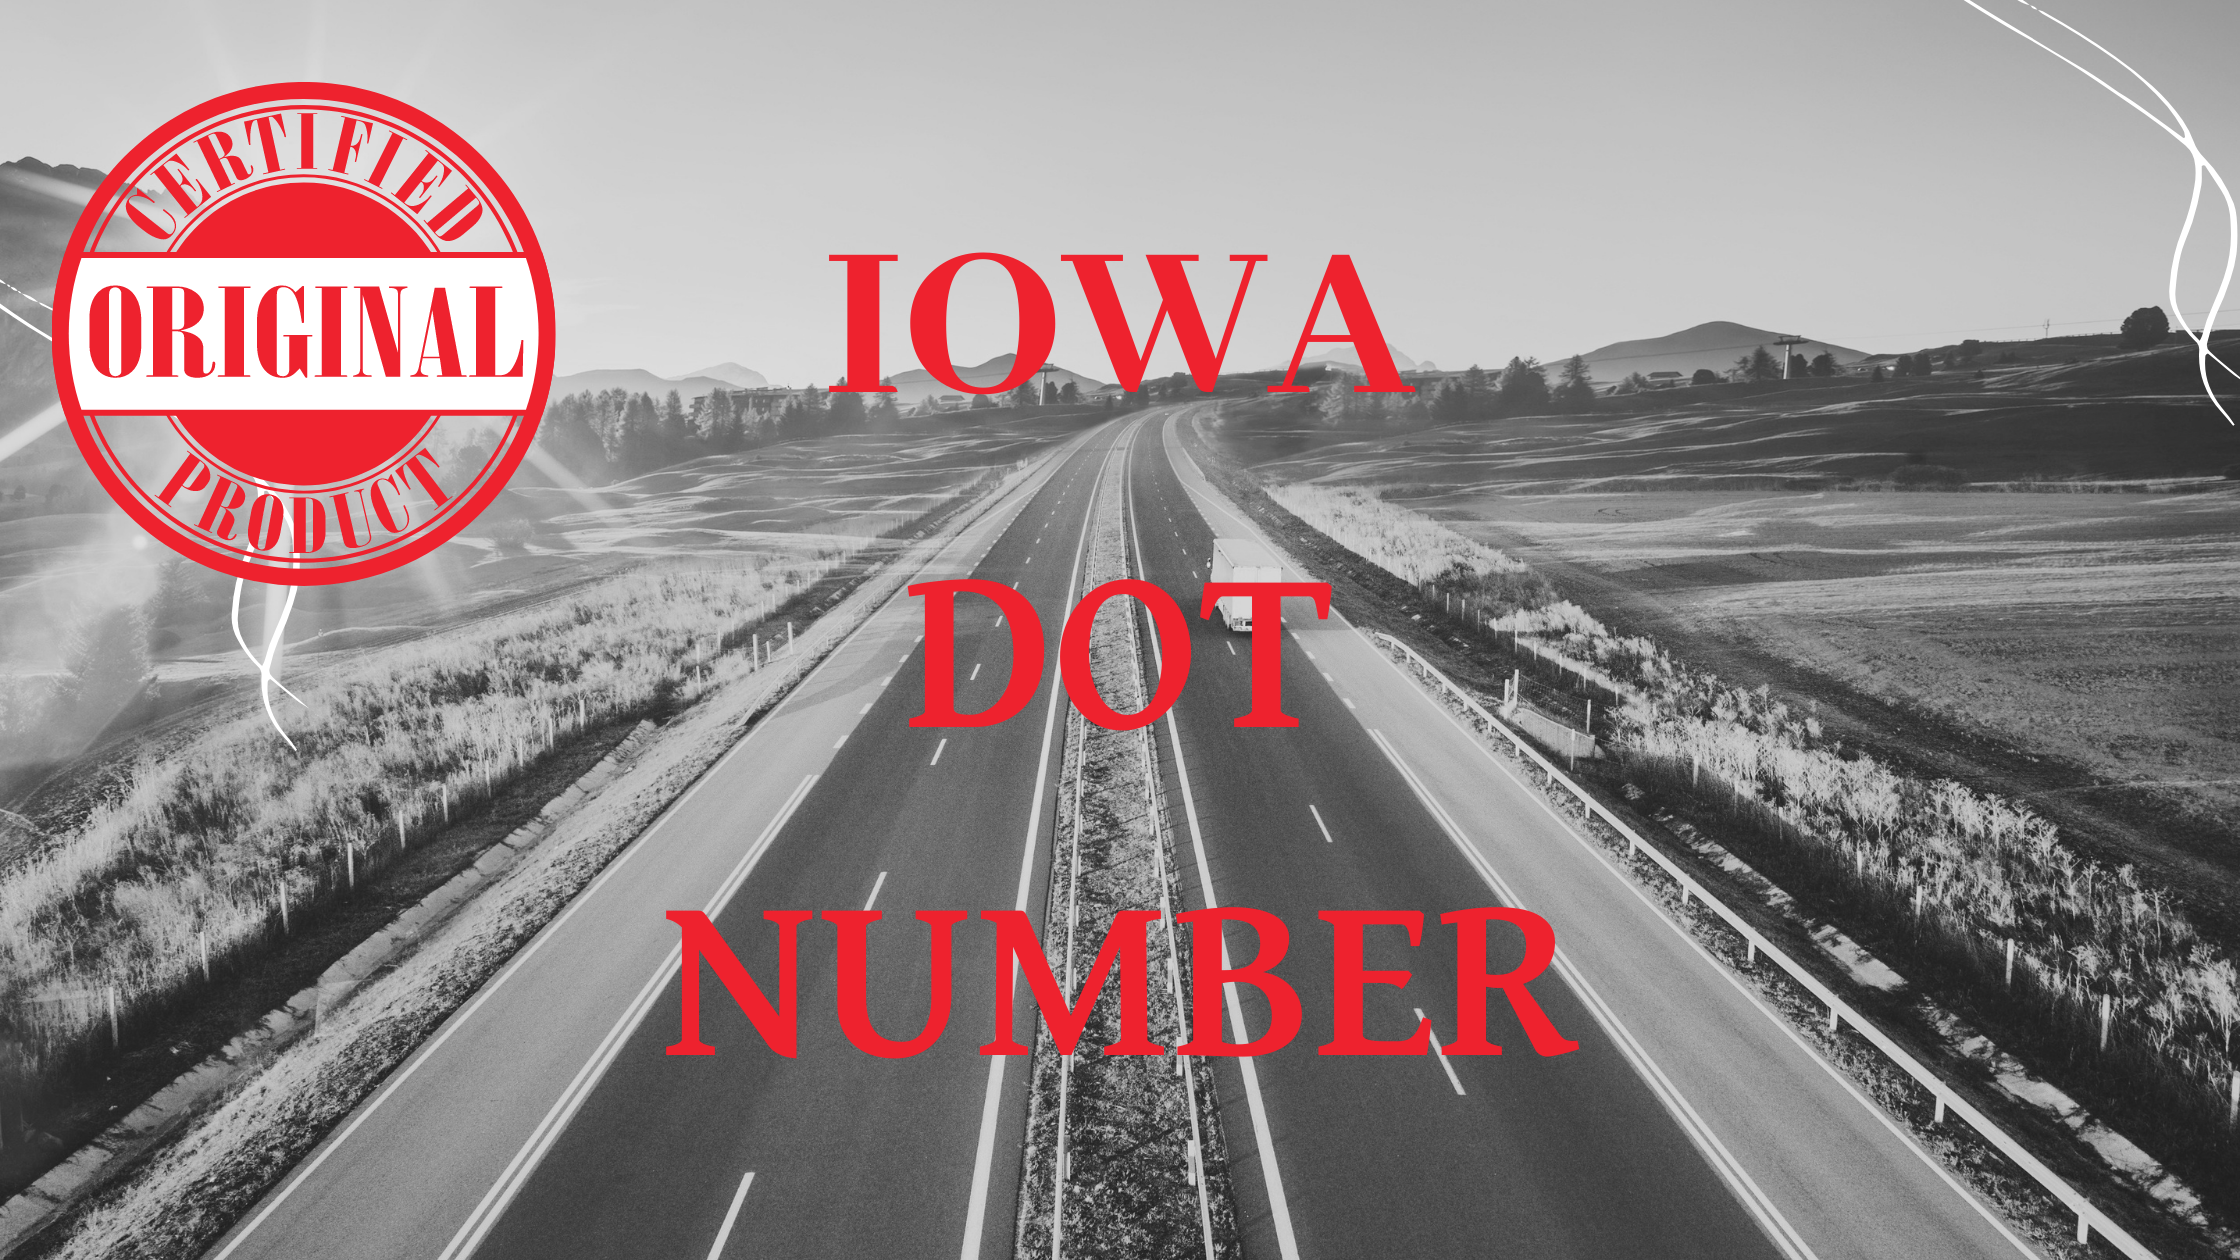 Iowa DOT Number for Commercial Vehicle